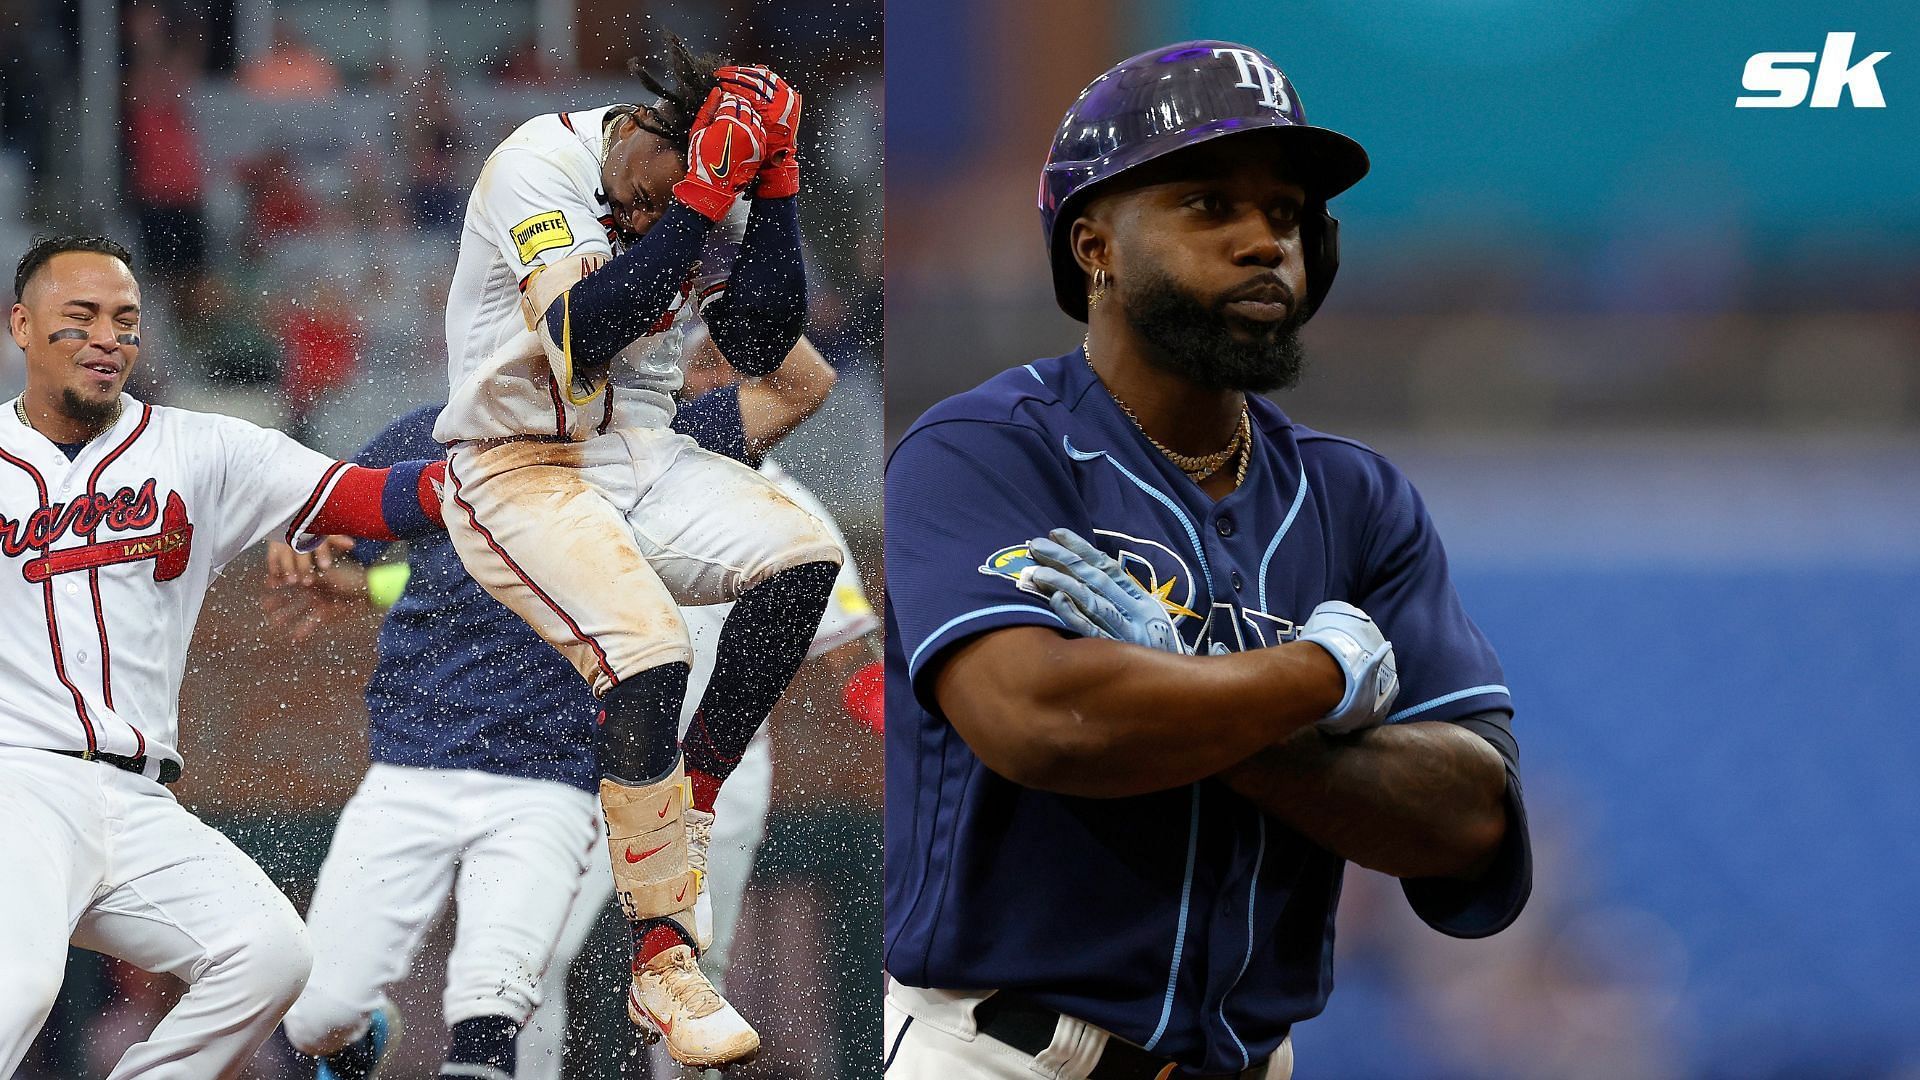 Ranking top players in 2021 MLB playoffs